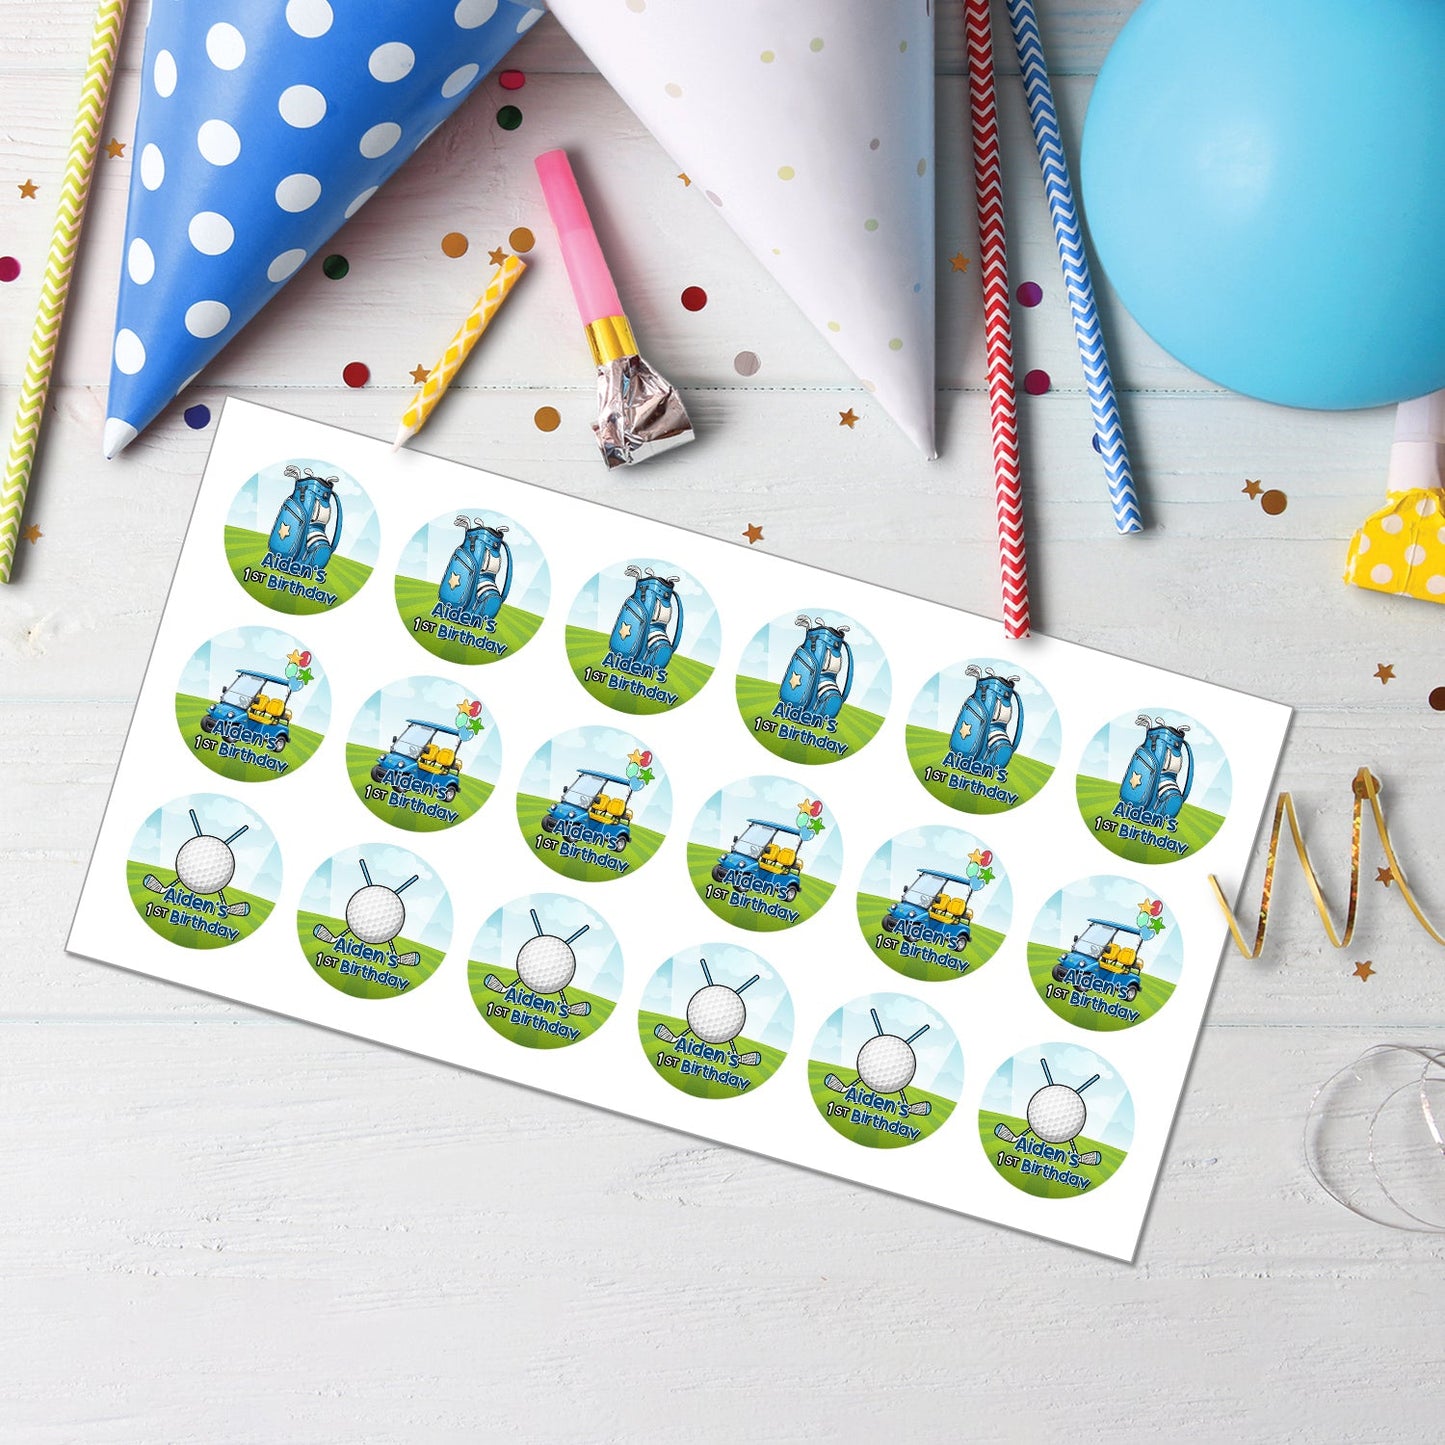 Mini Golf Cupcake Toppers - Personalized Touch for Mini Golf-Themed Parties and Events